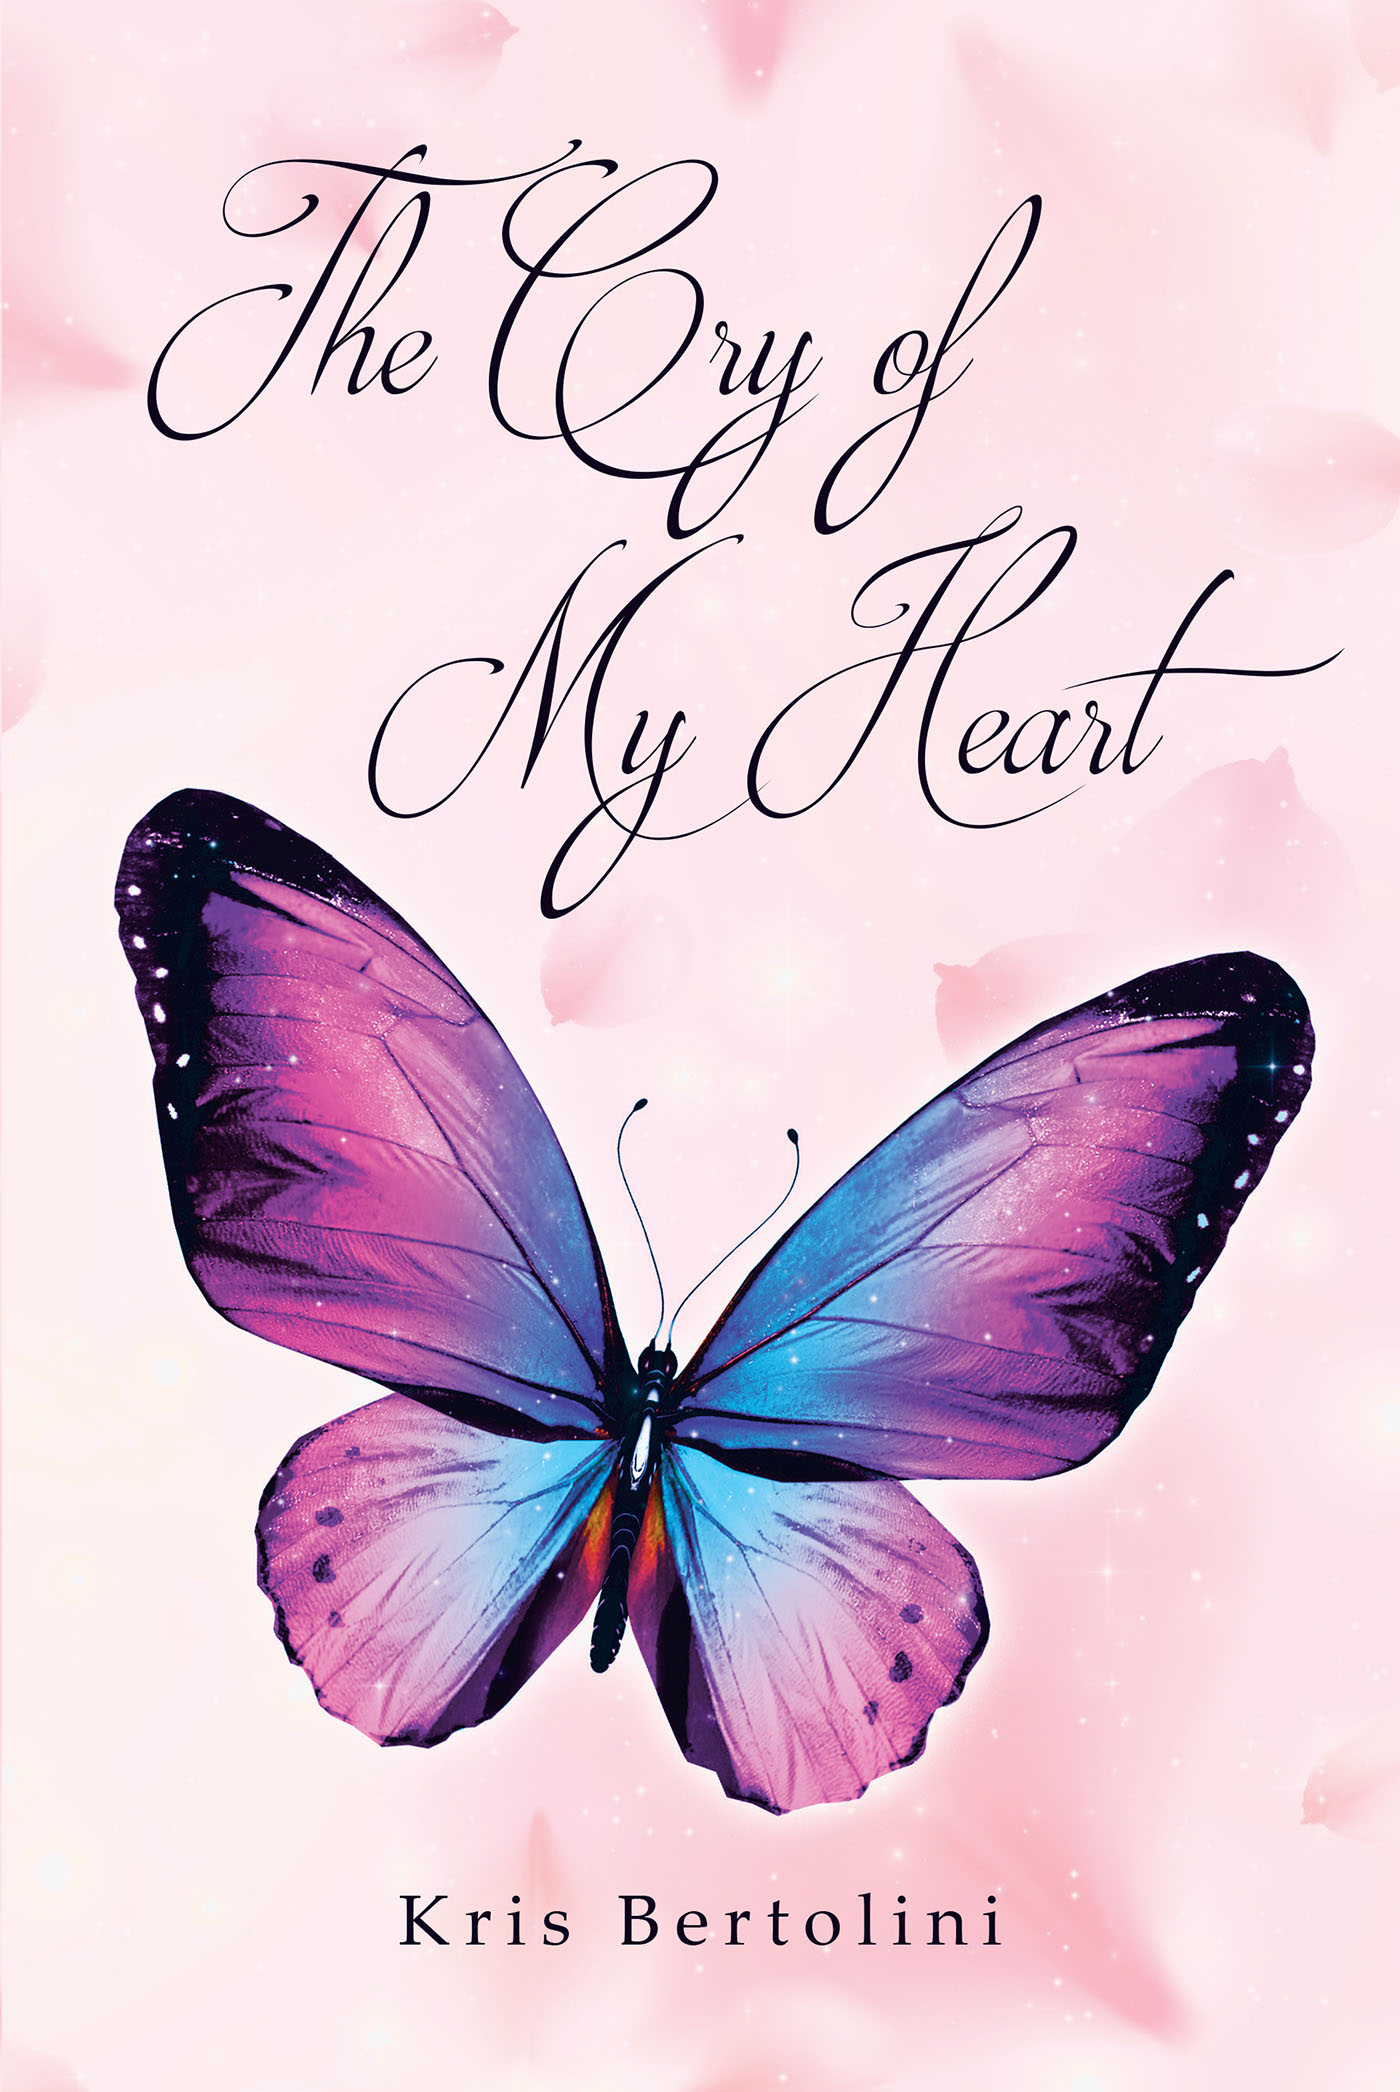 Author Kris Bertolini’s New Book, "The Cry of My Heart," is a Moving Series of Poems That Follow the Author During a Difficult Period of Her Life After Her Husband Left